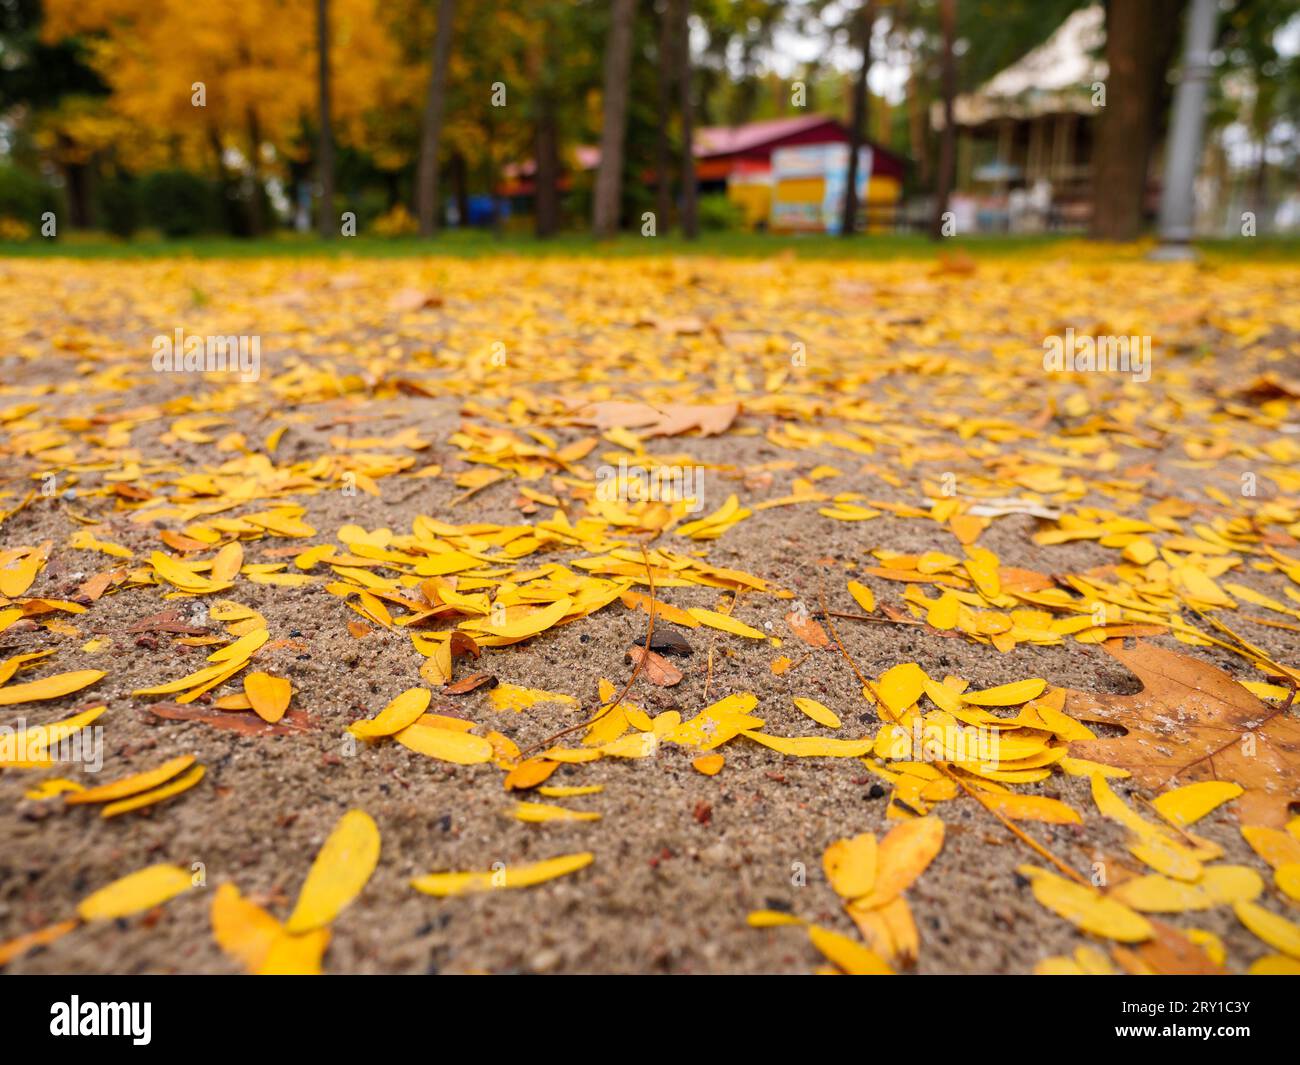 Closeup of golden yellow and orange autumn fallen leaves on a sandy path in a city park. Beautiful natural fall background. Stock Photo